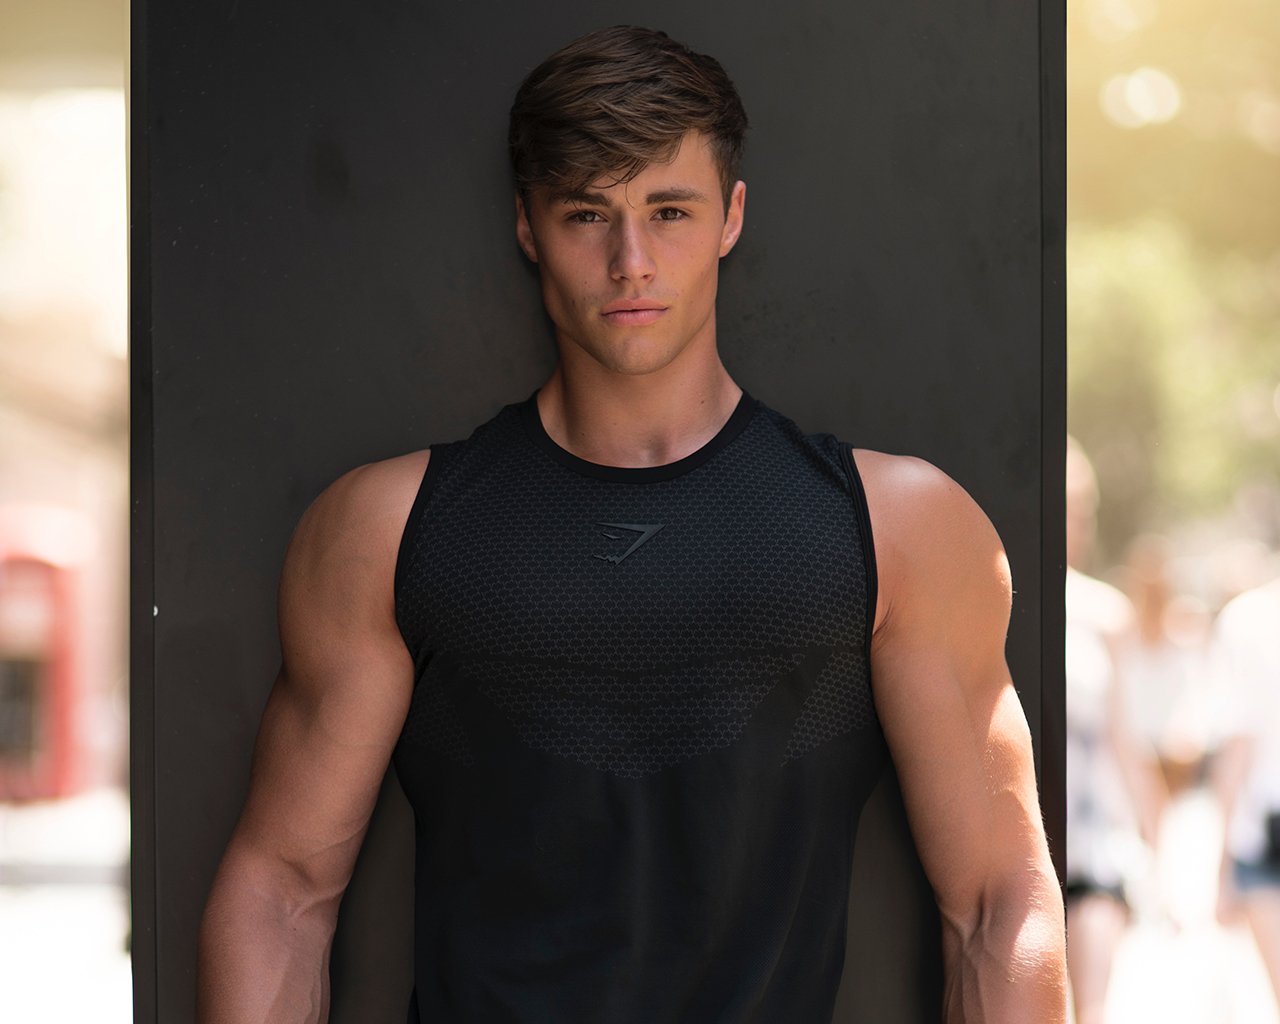 Gymshark on X: #GymsharkLDN The Onyx is here. Yep, you guessed it